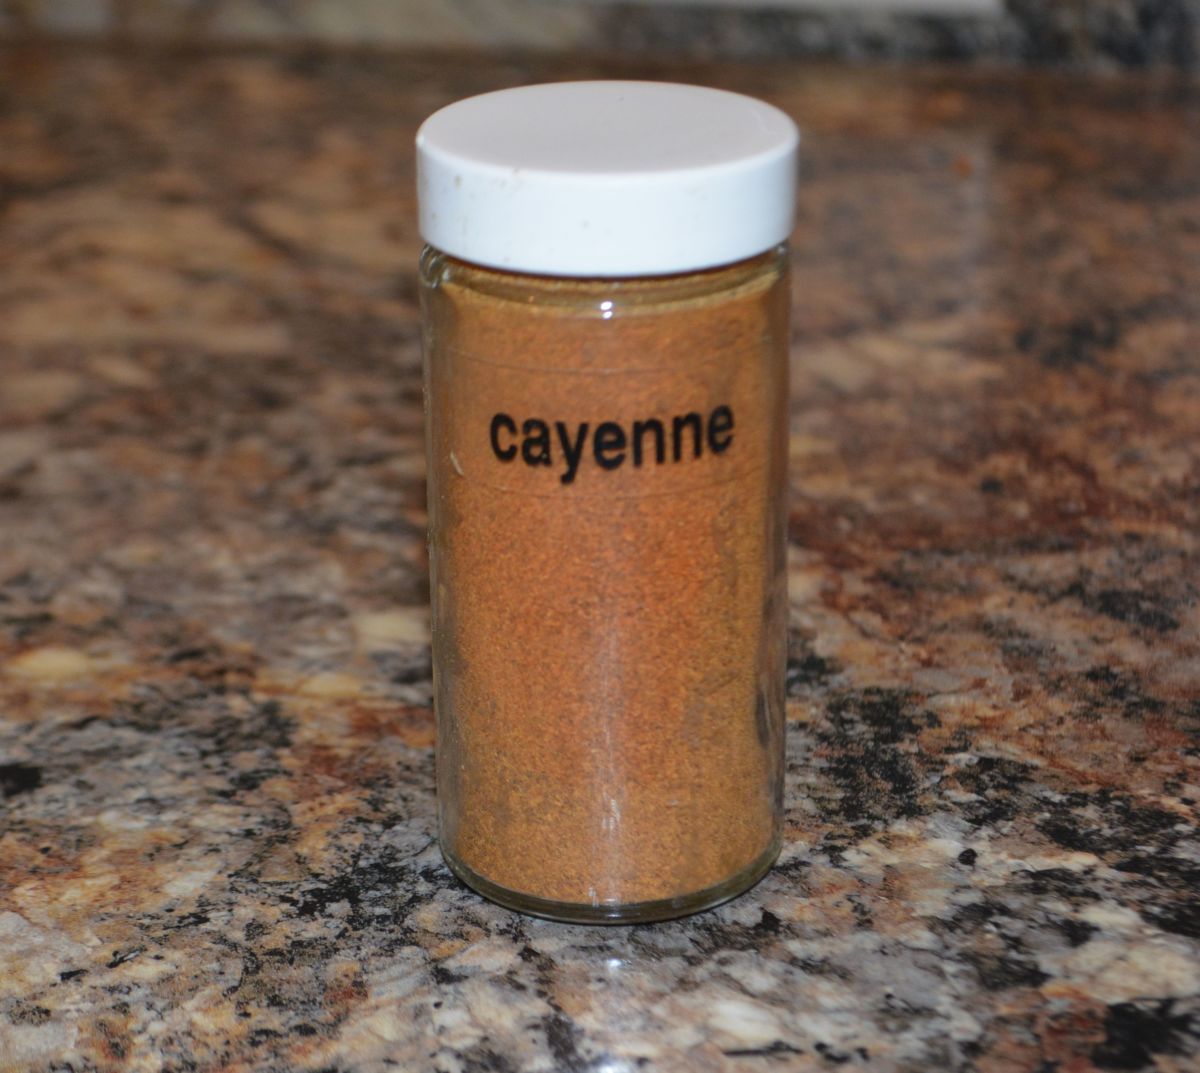 Dissolve cayenne pepper in warm water, then spray it on plants to discourage pests.